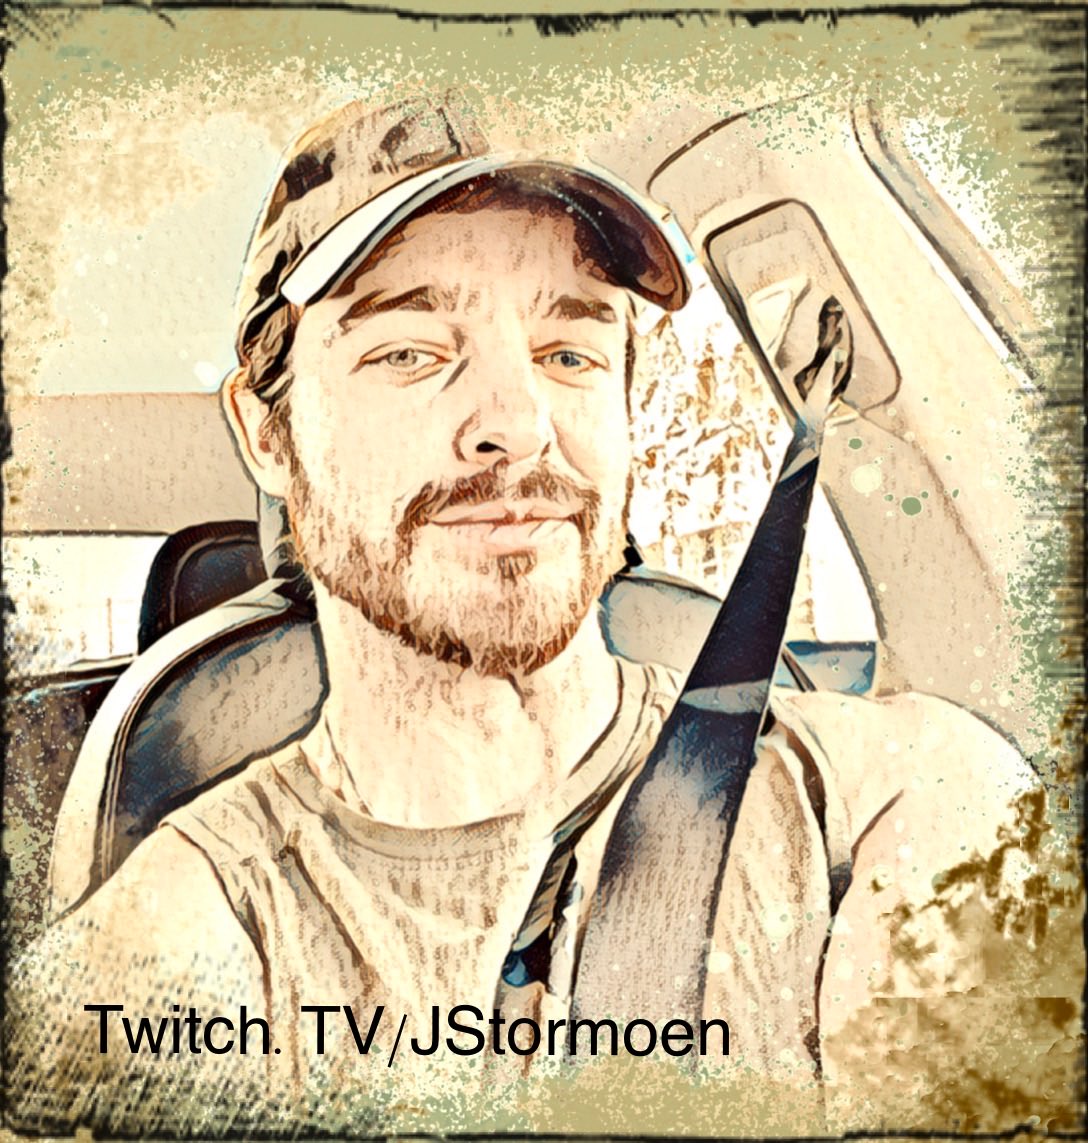 Thursday, Thor's Day, Twitch Day!  Noon PST.  (Tues was loads of fun, tune in to see if the fun quotient is raised even more on Thursdays) https://t.co/a2r2ktUcCx